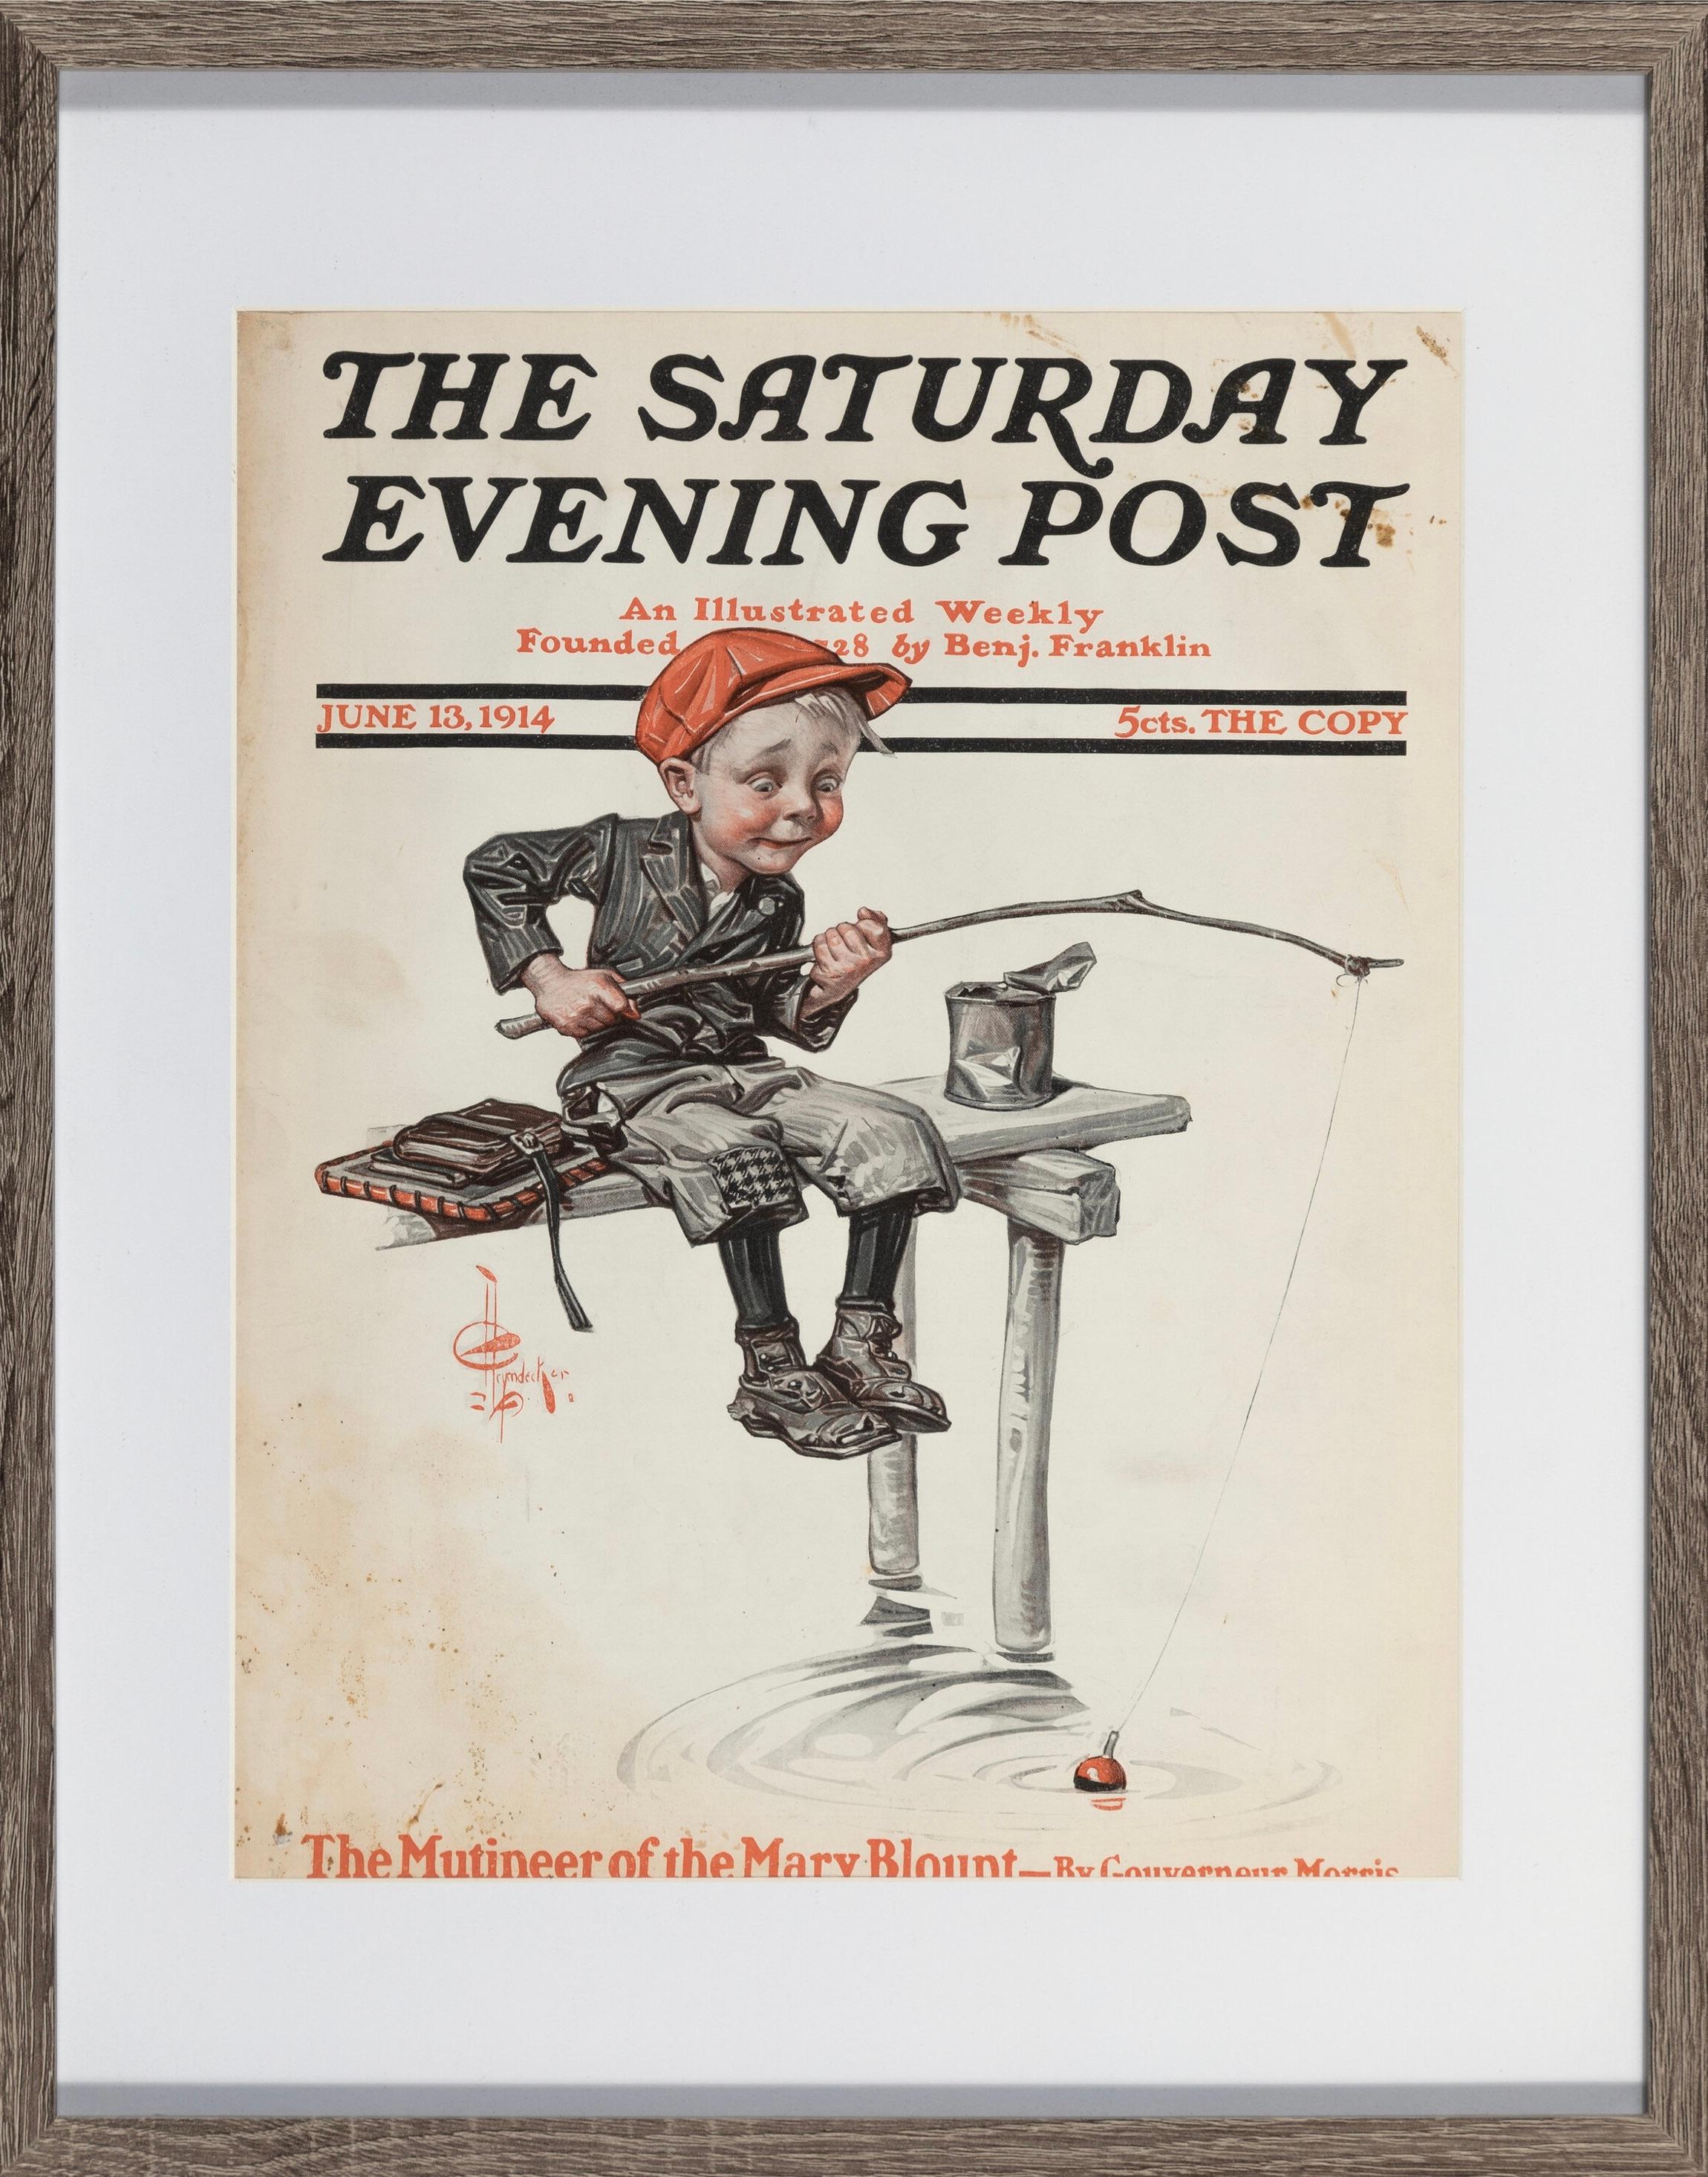 Playing Hooky, Post Cover - Gray Figurative Painting by Joseph Christian Leyendecker